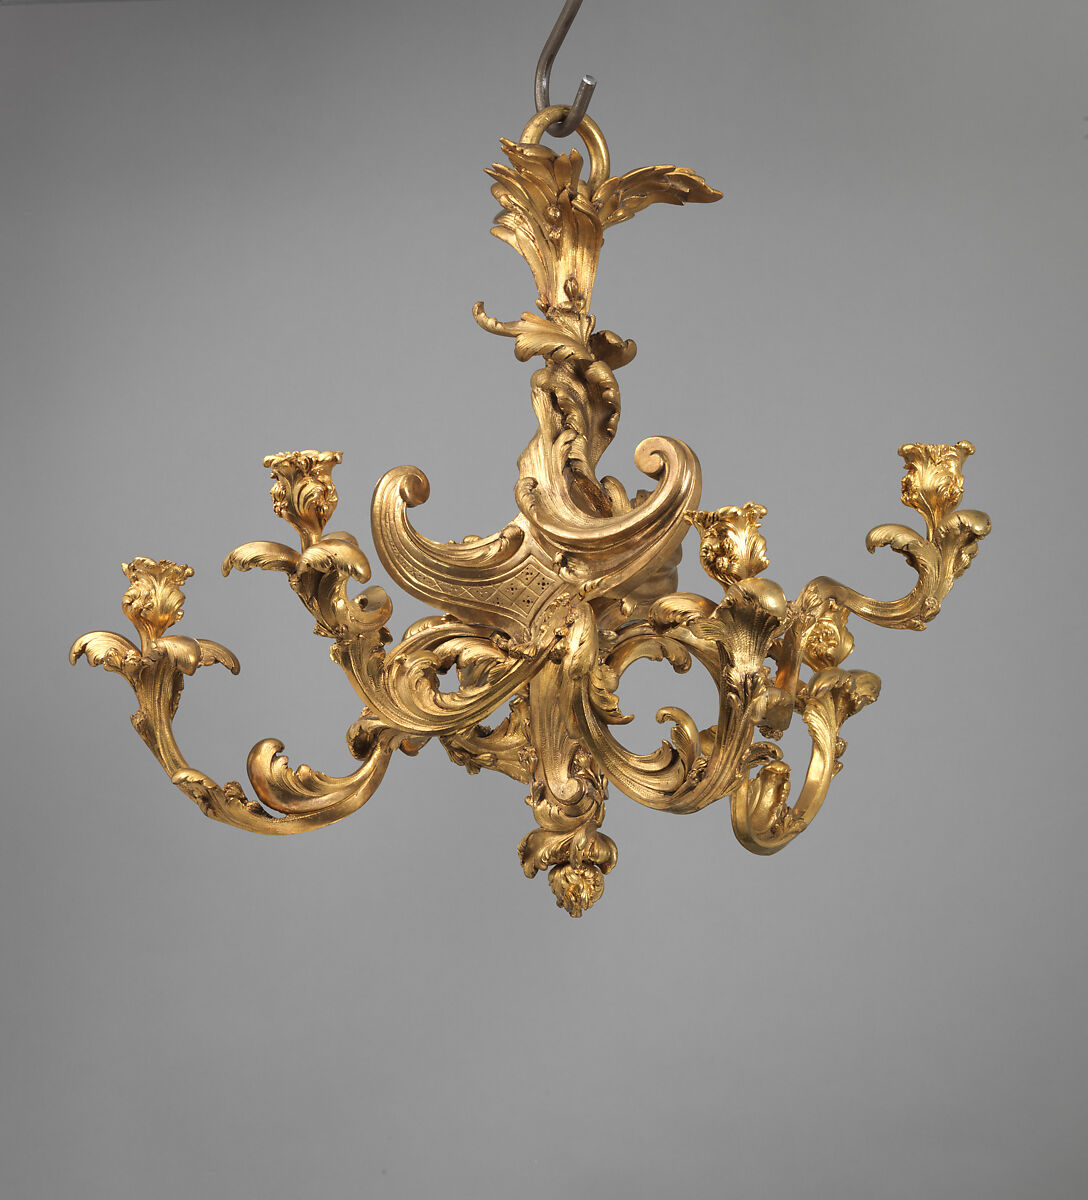 Six-light chandelier (one of a pair), Gilt bronze, probably French 